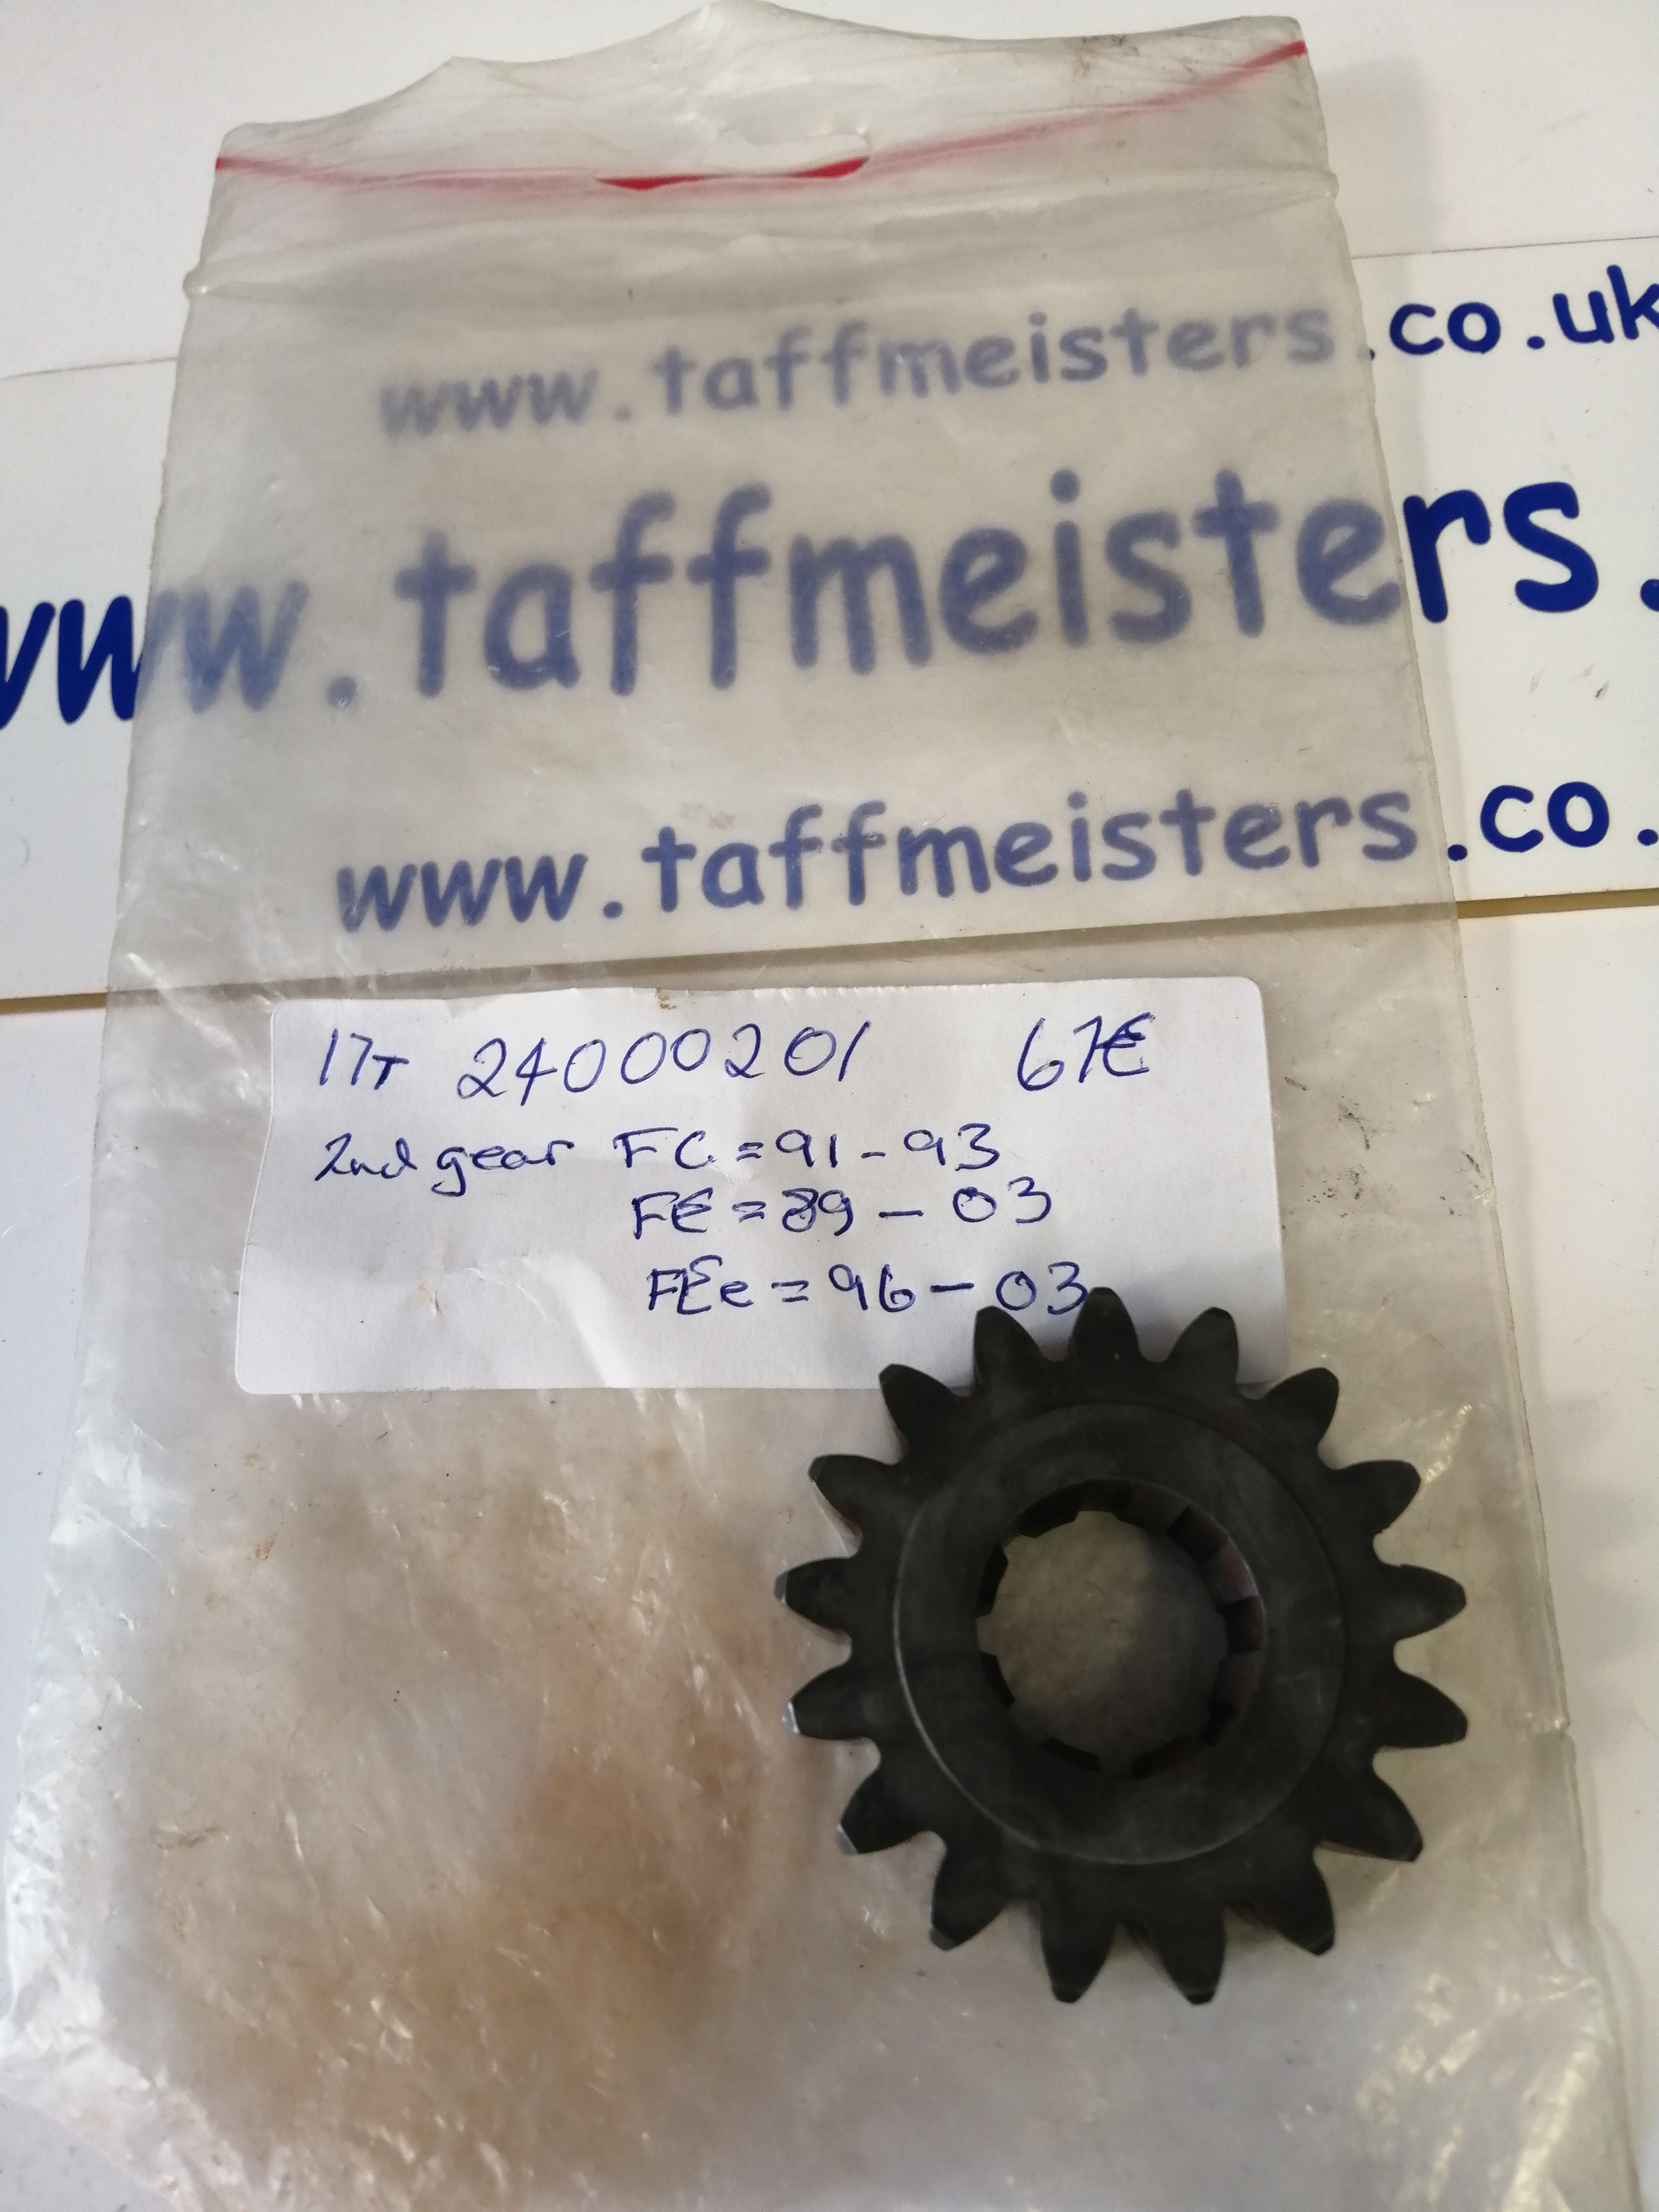 101373 - 17T output - 24000201 Idler Gear 2nd.  Suits FE; 1989-2003. FEe models; 1996-2003. FC; 1991-1993